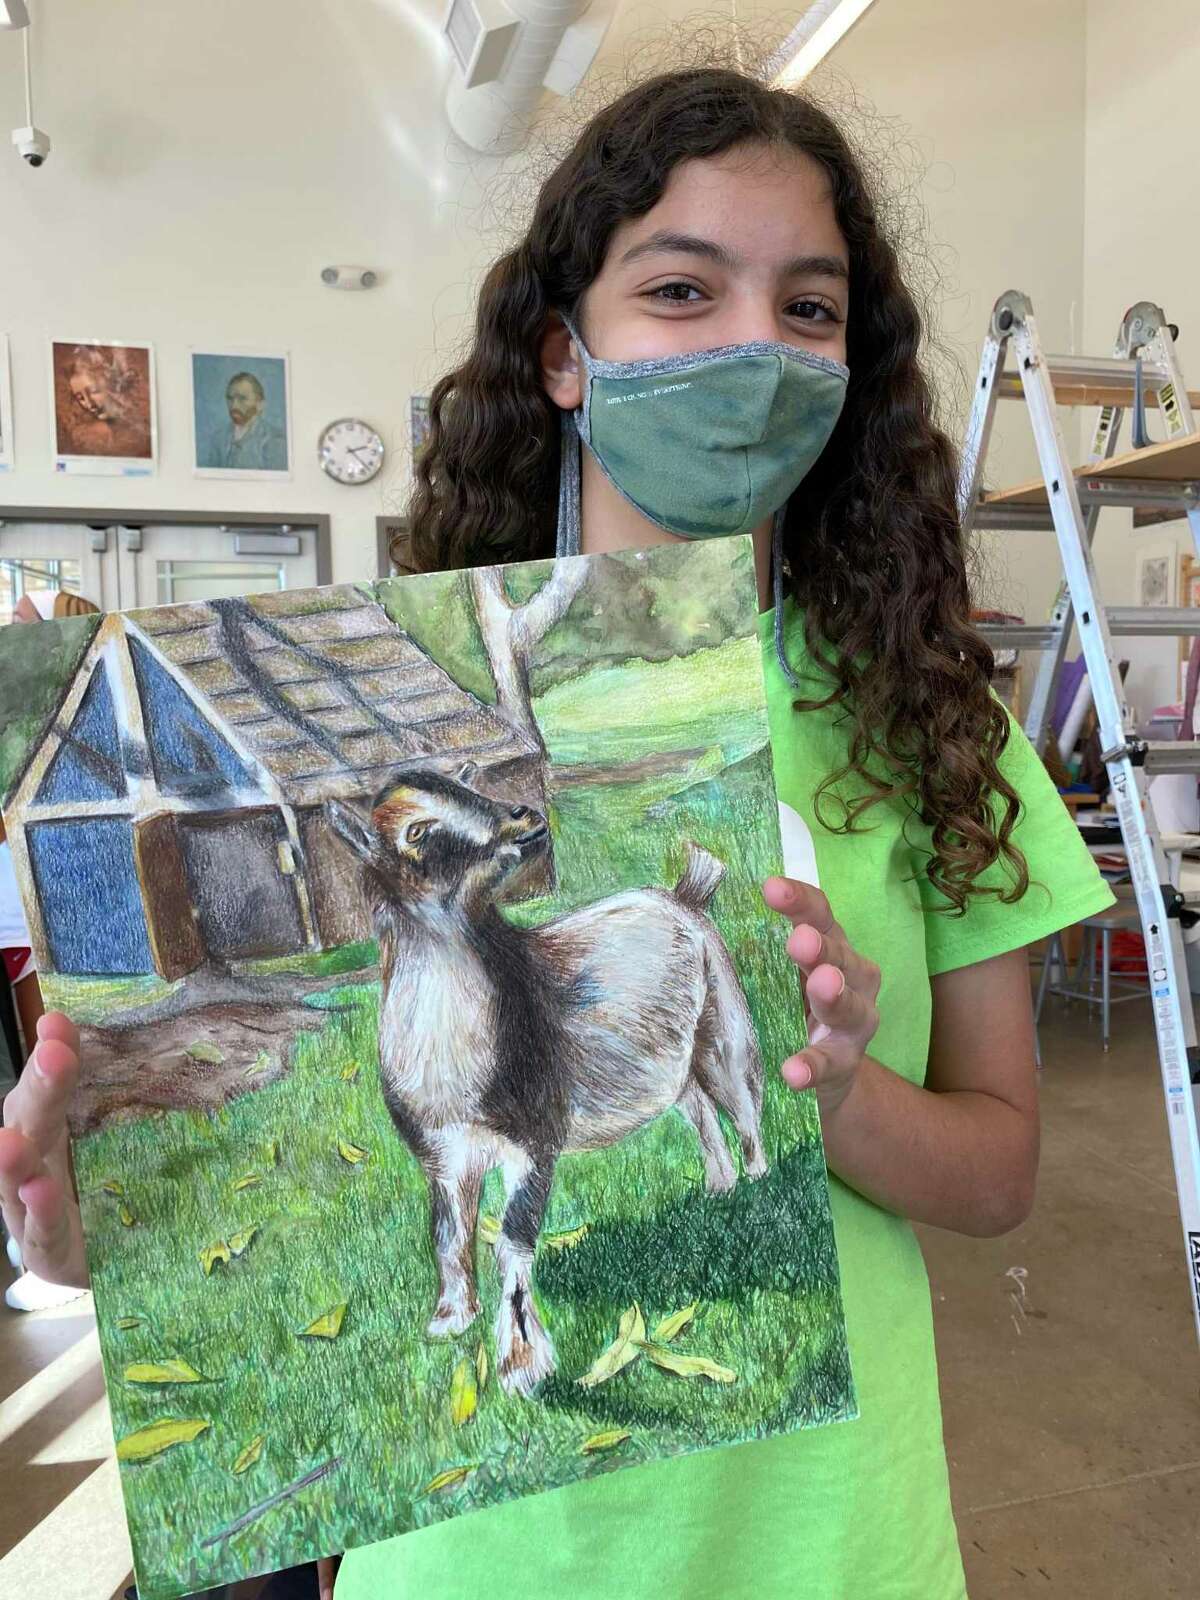 WIDE School sixth grader Luna Baba shows off her Best of Show piece from the rodeo art program.